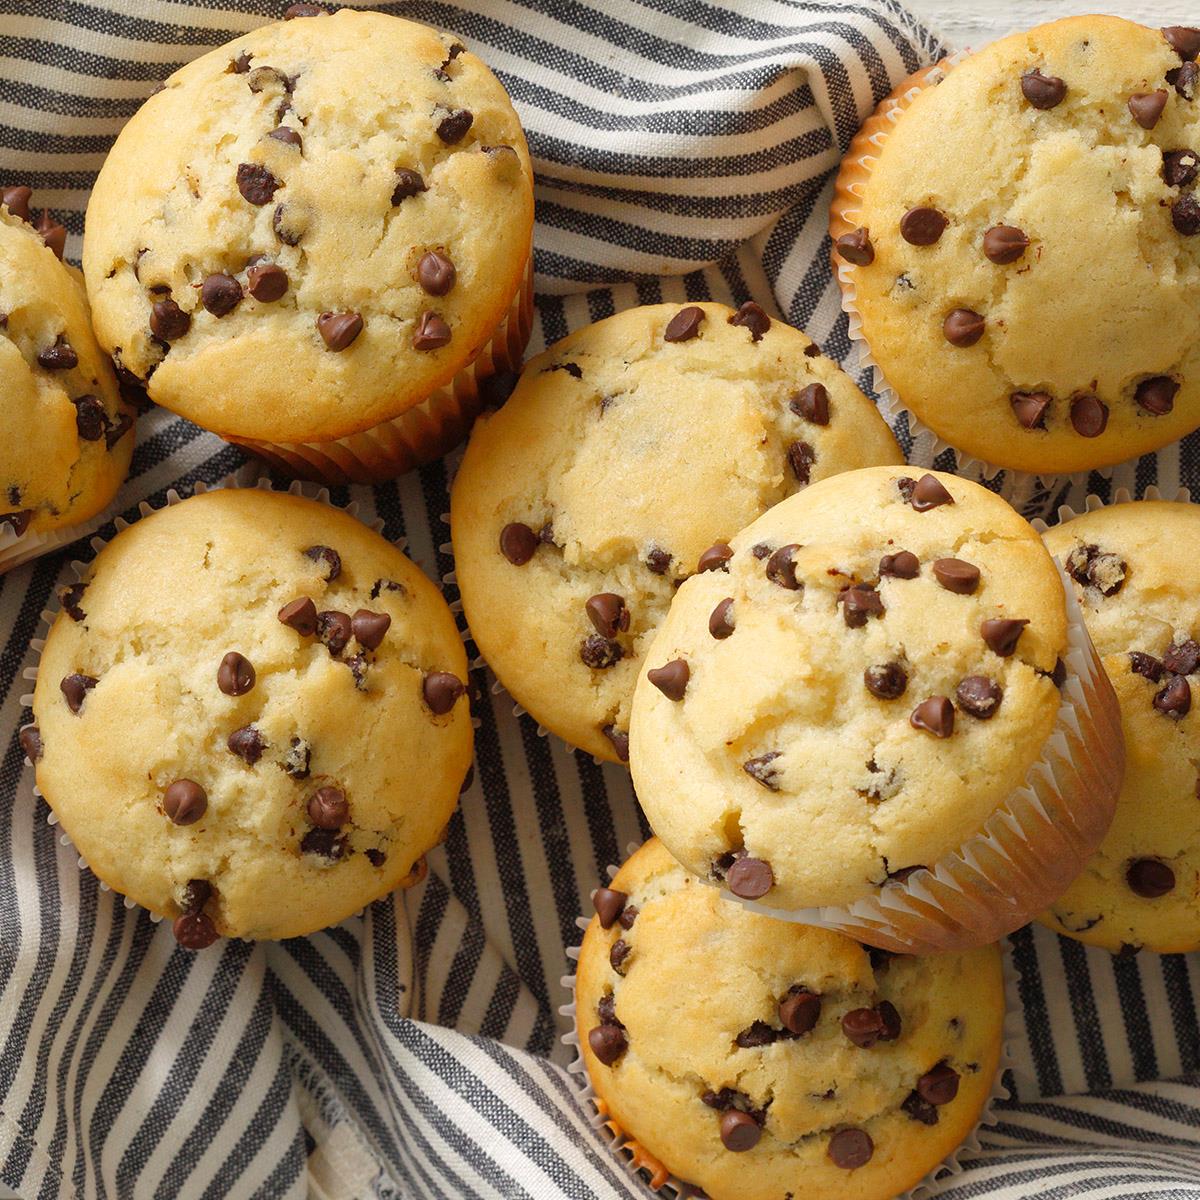 Top 4 Chocolate Chip Muffins Recipes